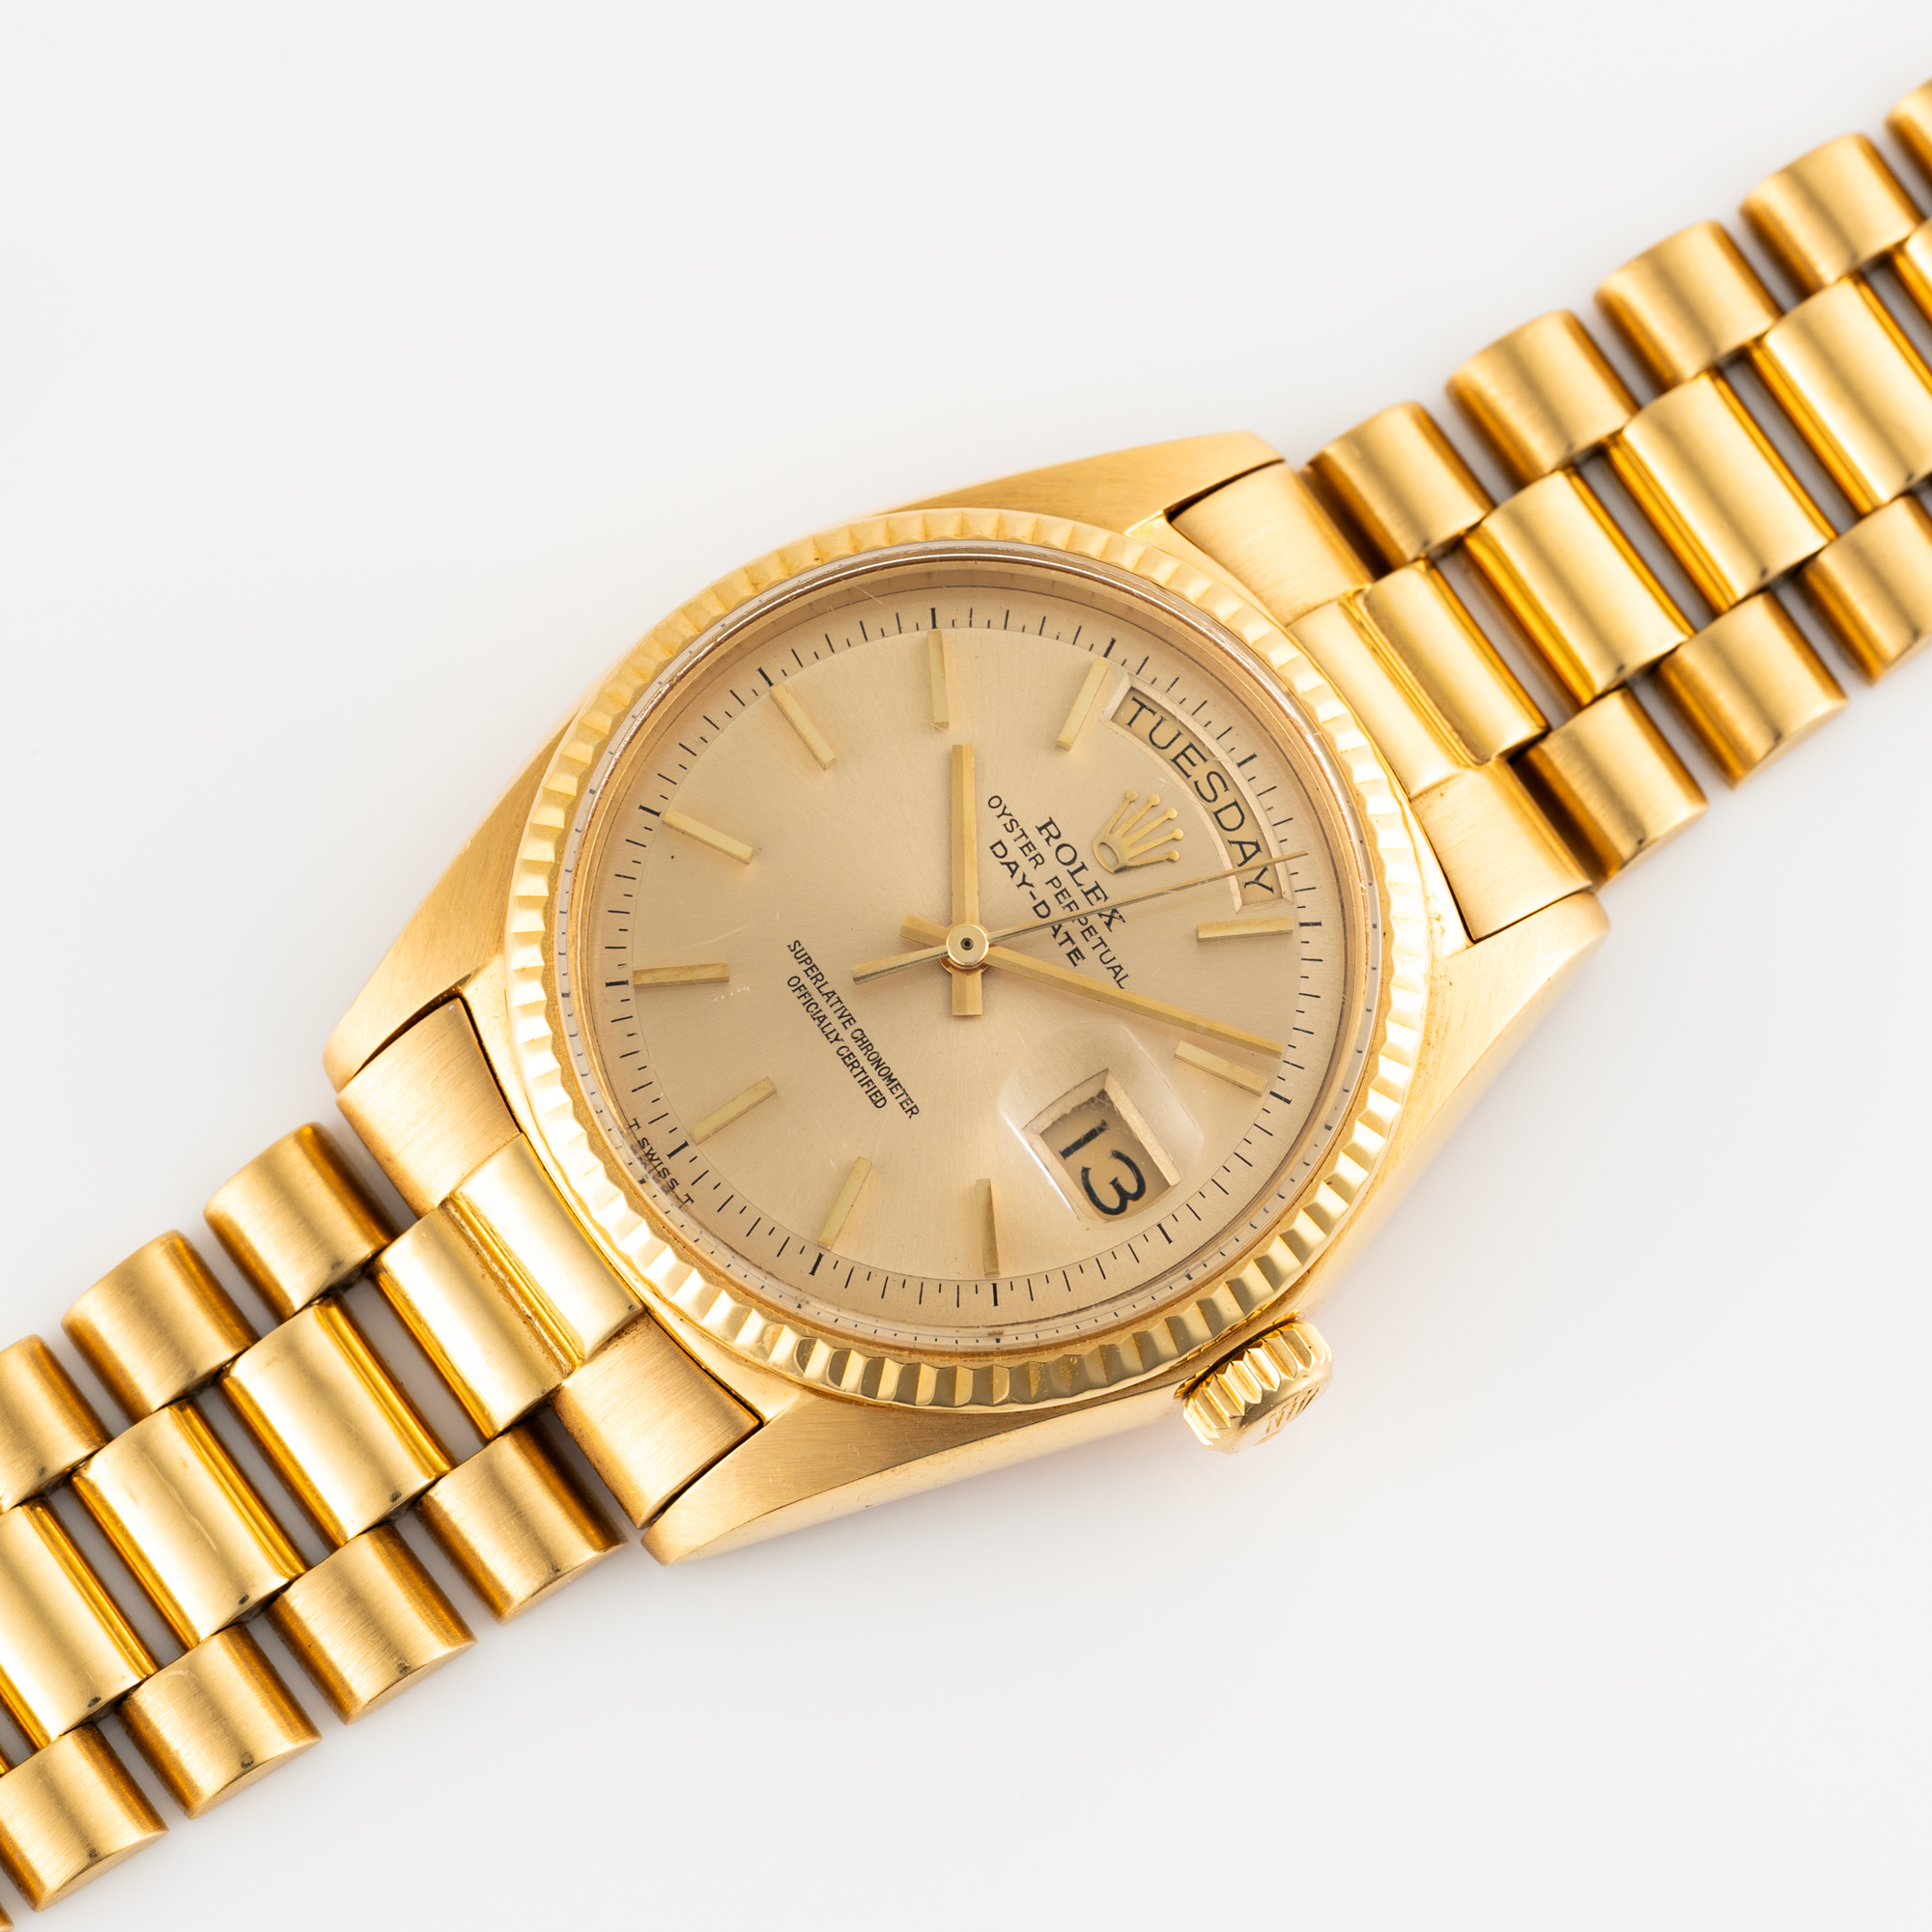 A GENTLEMAN'S SIZE 18K SOLID YELLOW GOLD ROLEX OYSTER PERPETUAL DAY DATE BRACELET WATCH CIRCA - Image 3 of 9